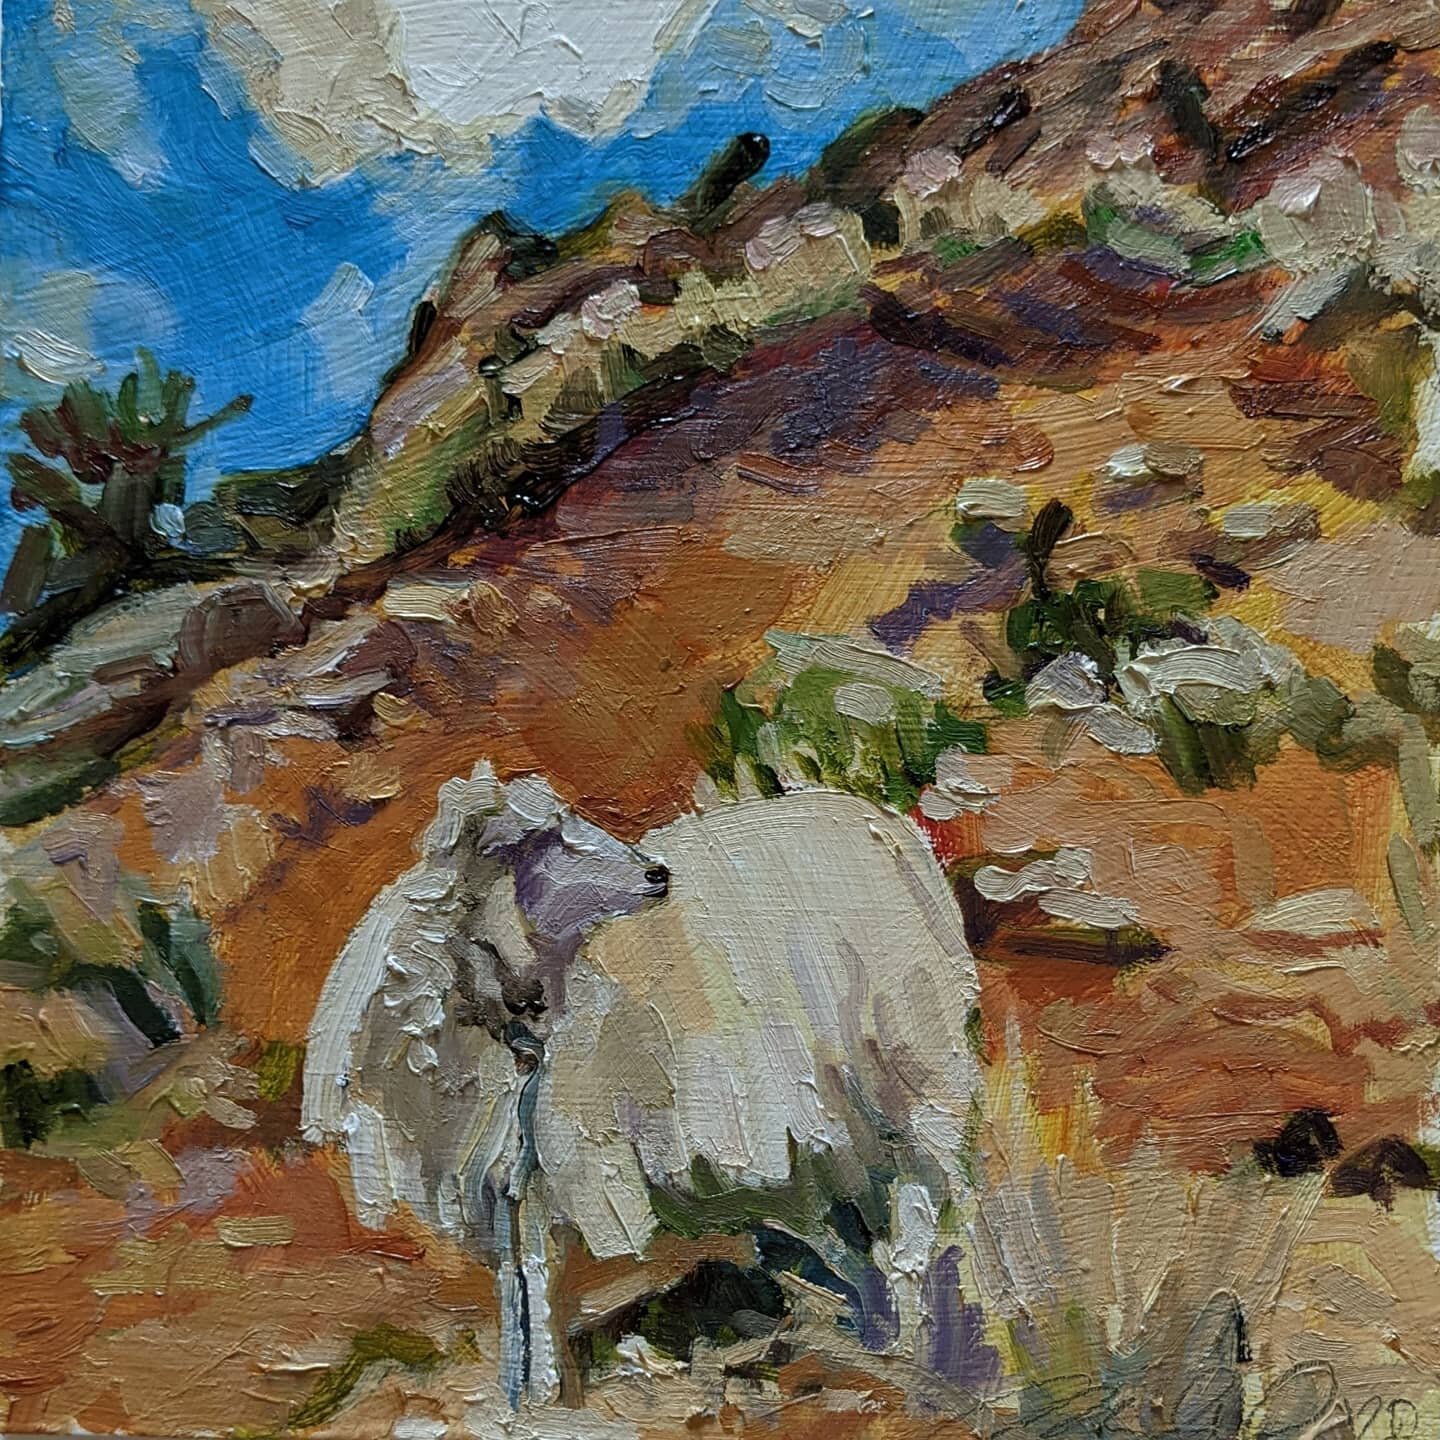 these 2 paintings are making their way to navajo nation in arizona, to the home of @nikylewes a shepherd and weaver. check out their new endeavor @rainbowfibercoop . they raise beautiful navajo churro sheep and the work of local and indigenous weaver